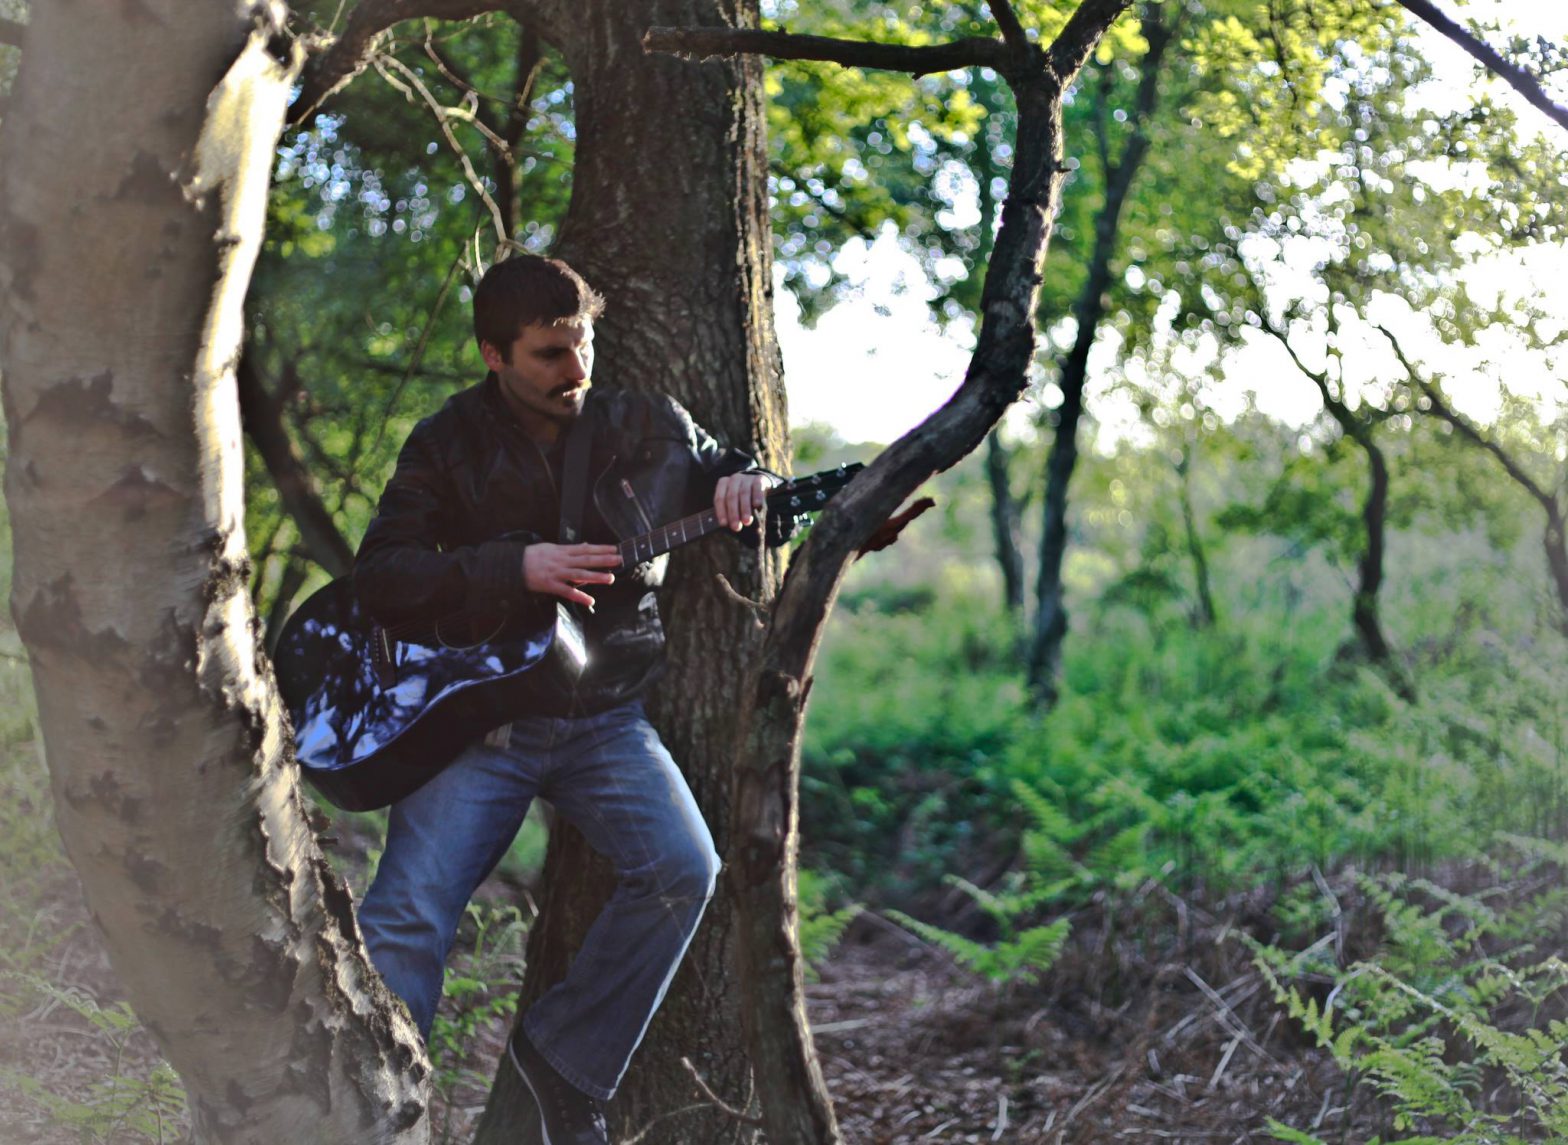 photo of a man on his guitar in a forest